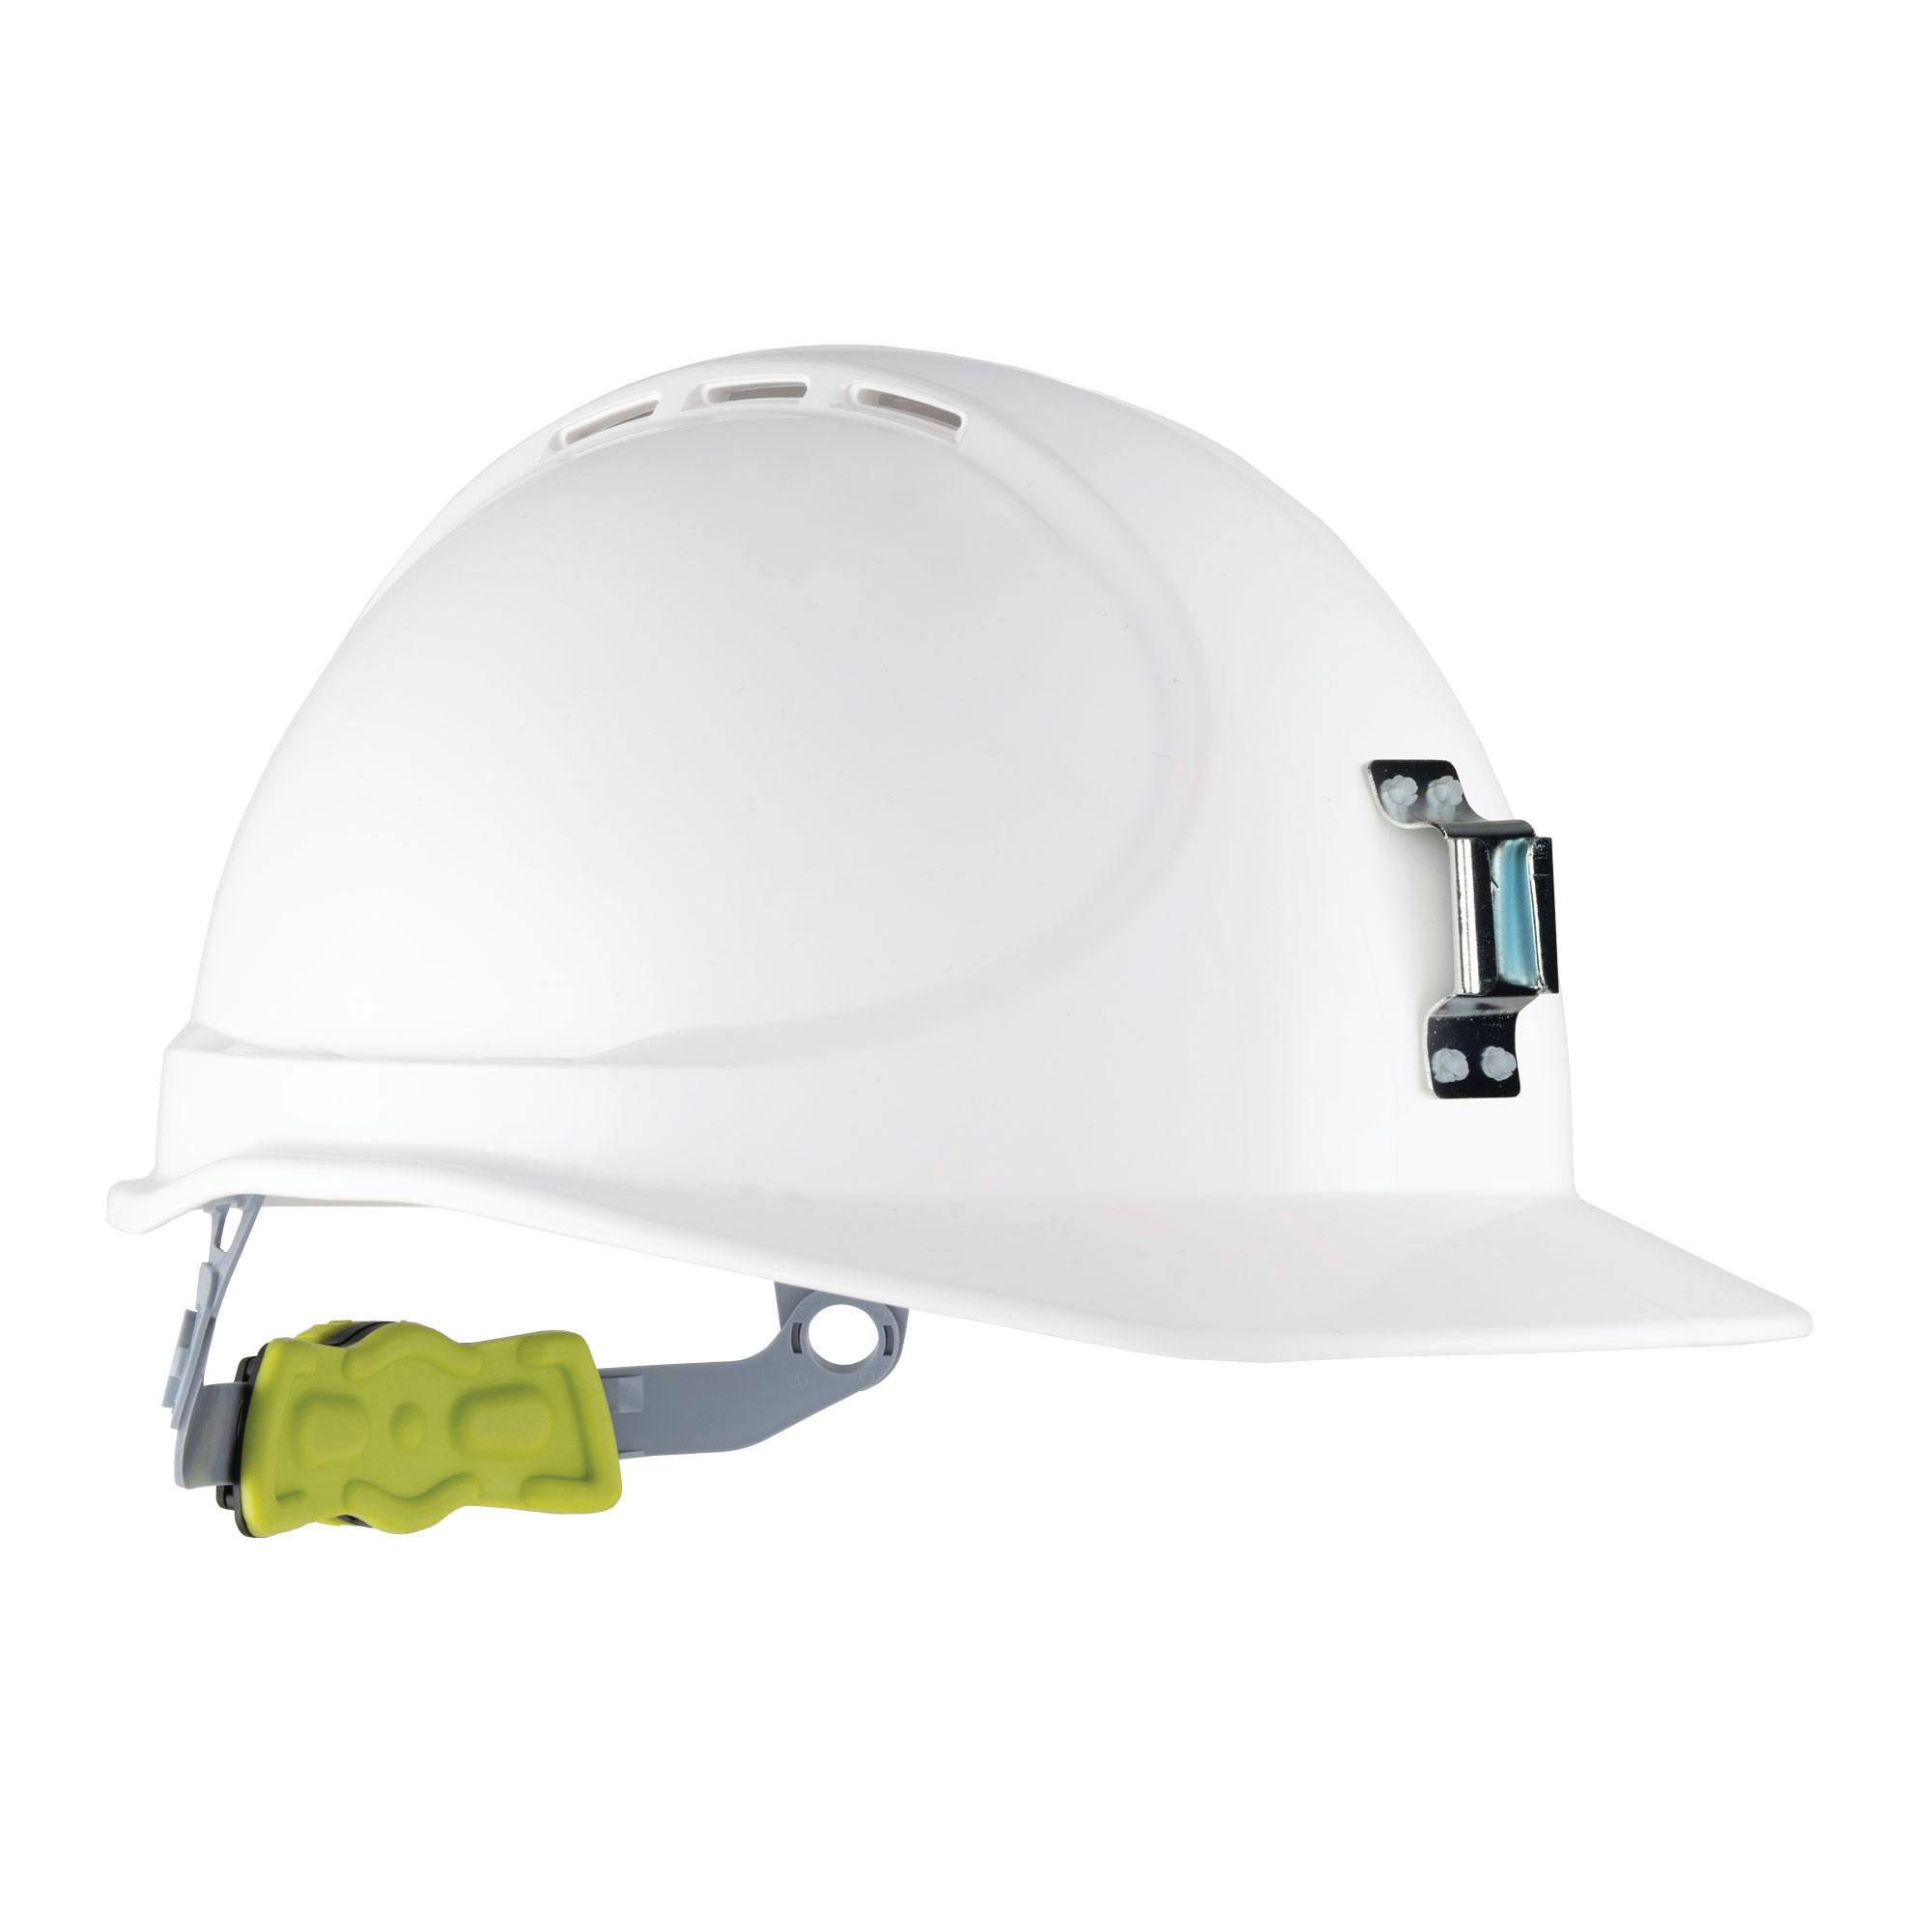 Force360 GTE7 ABS Vented Miners Hard Hat With Ratchet Harness, Type1 (White)_2